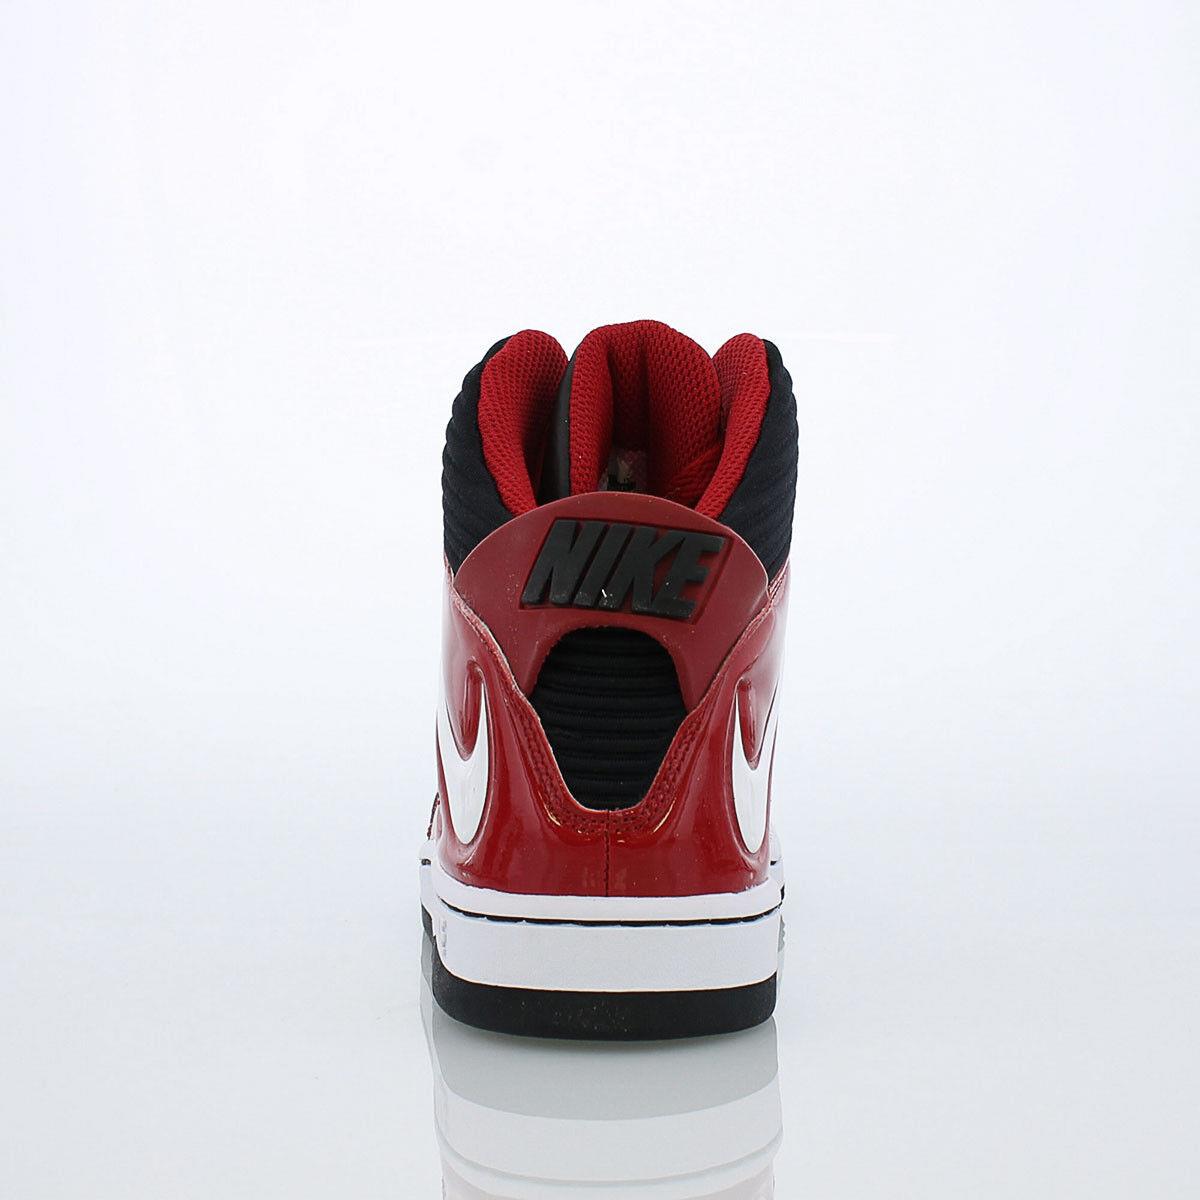 Nike shoes  - Black/Red 2